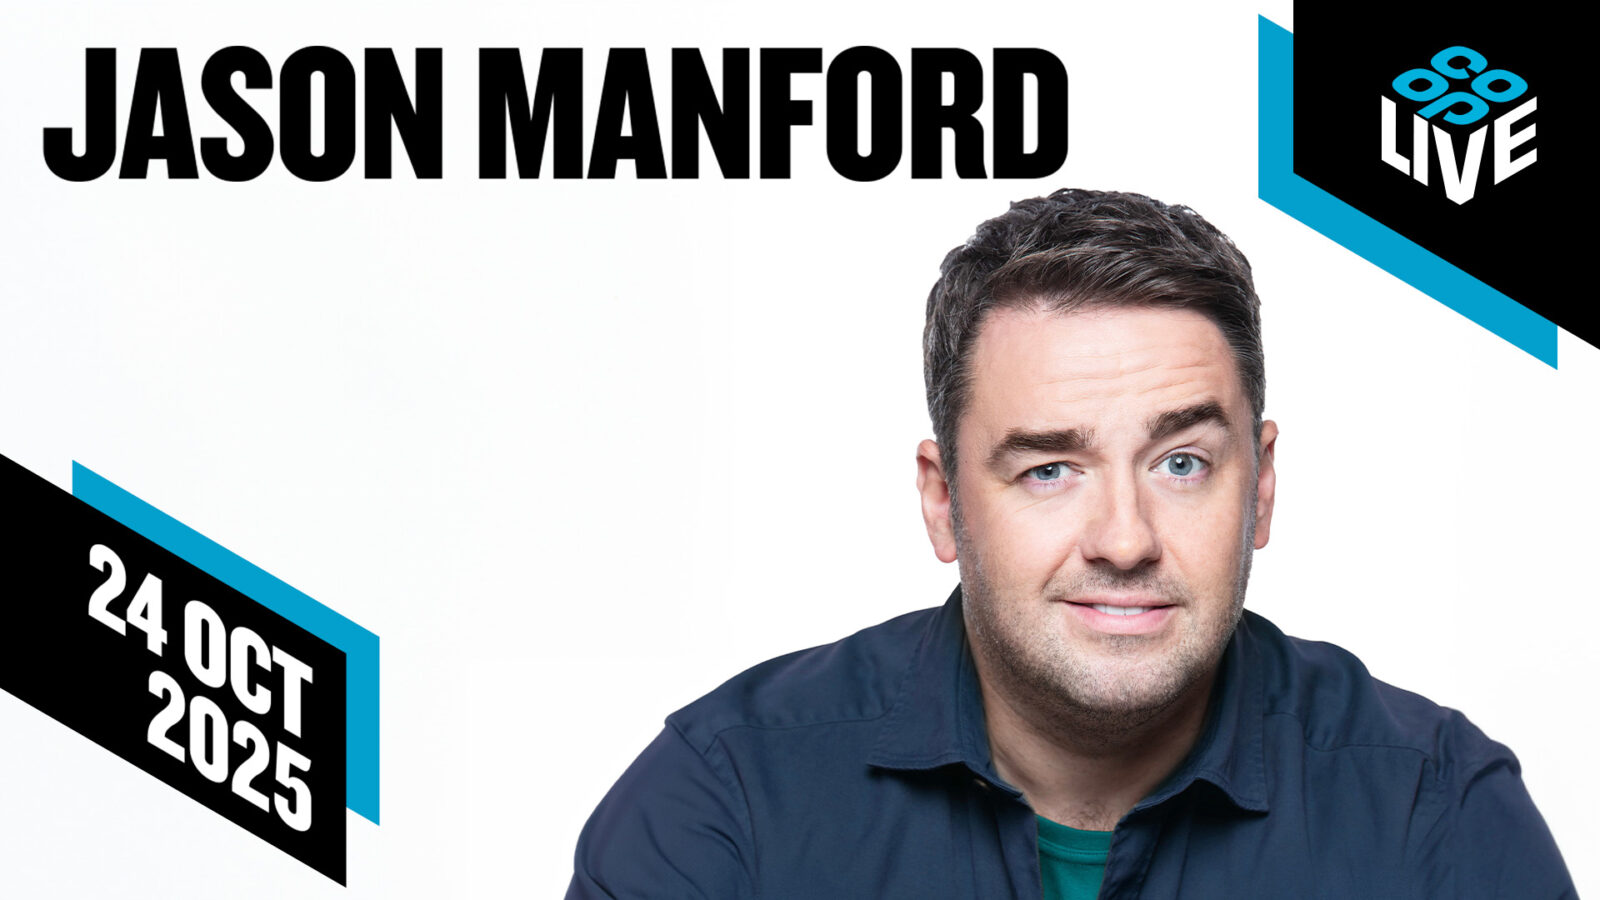 Jason Manford has announced a Manchester Co-op Live gig for 2025.